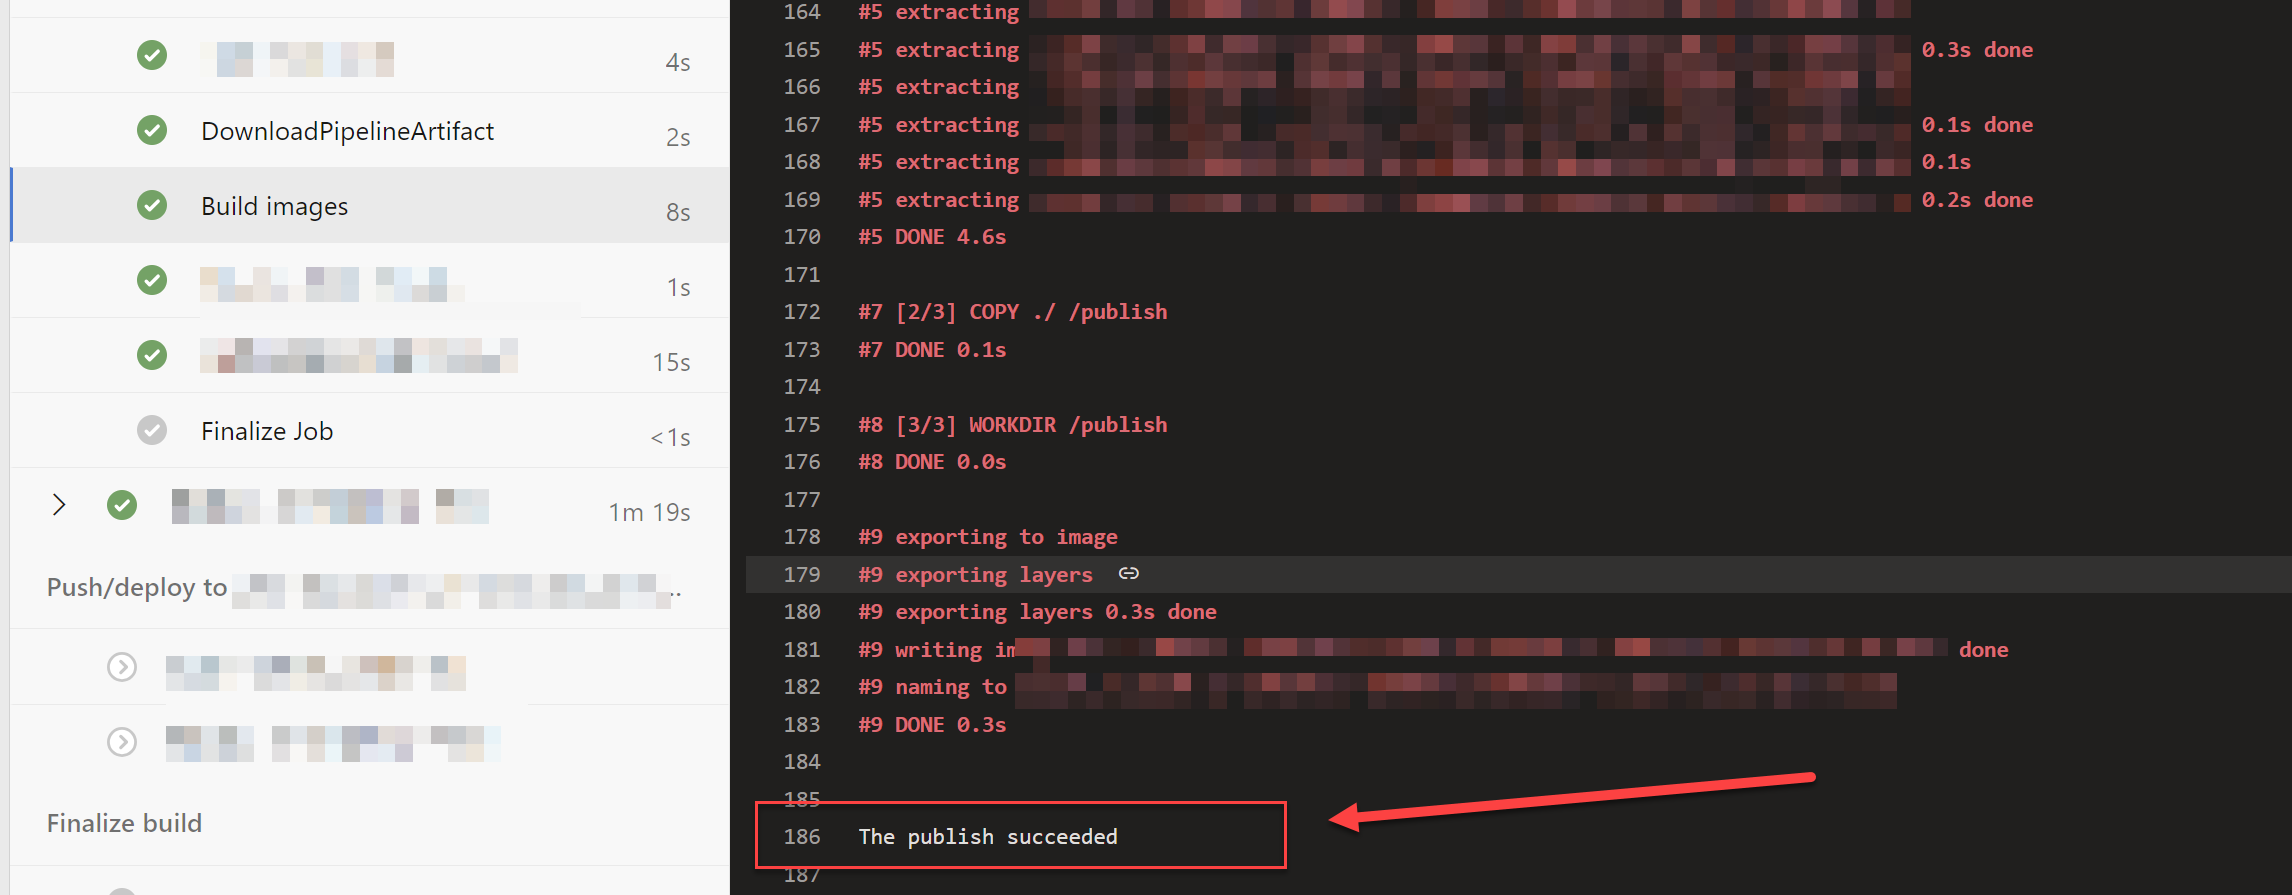 Azure DevOps STDERR output to STDIO causes the logs to show a lot of red.